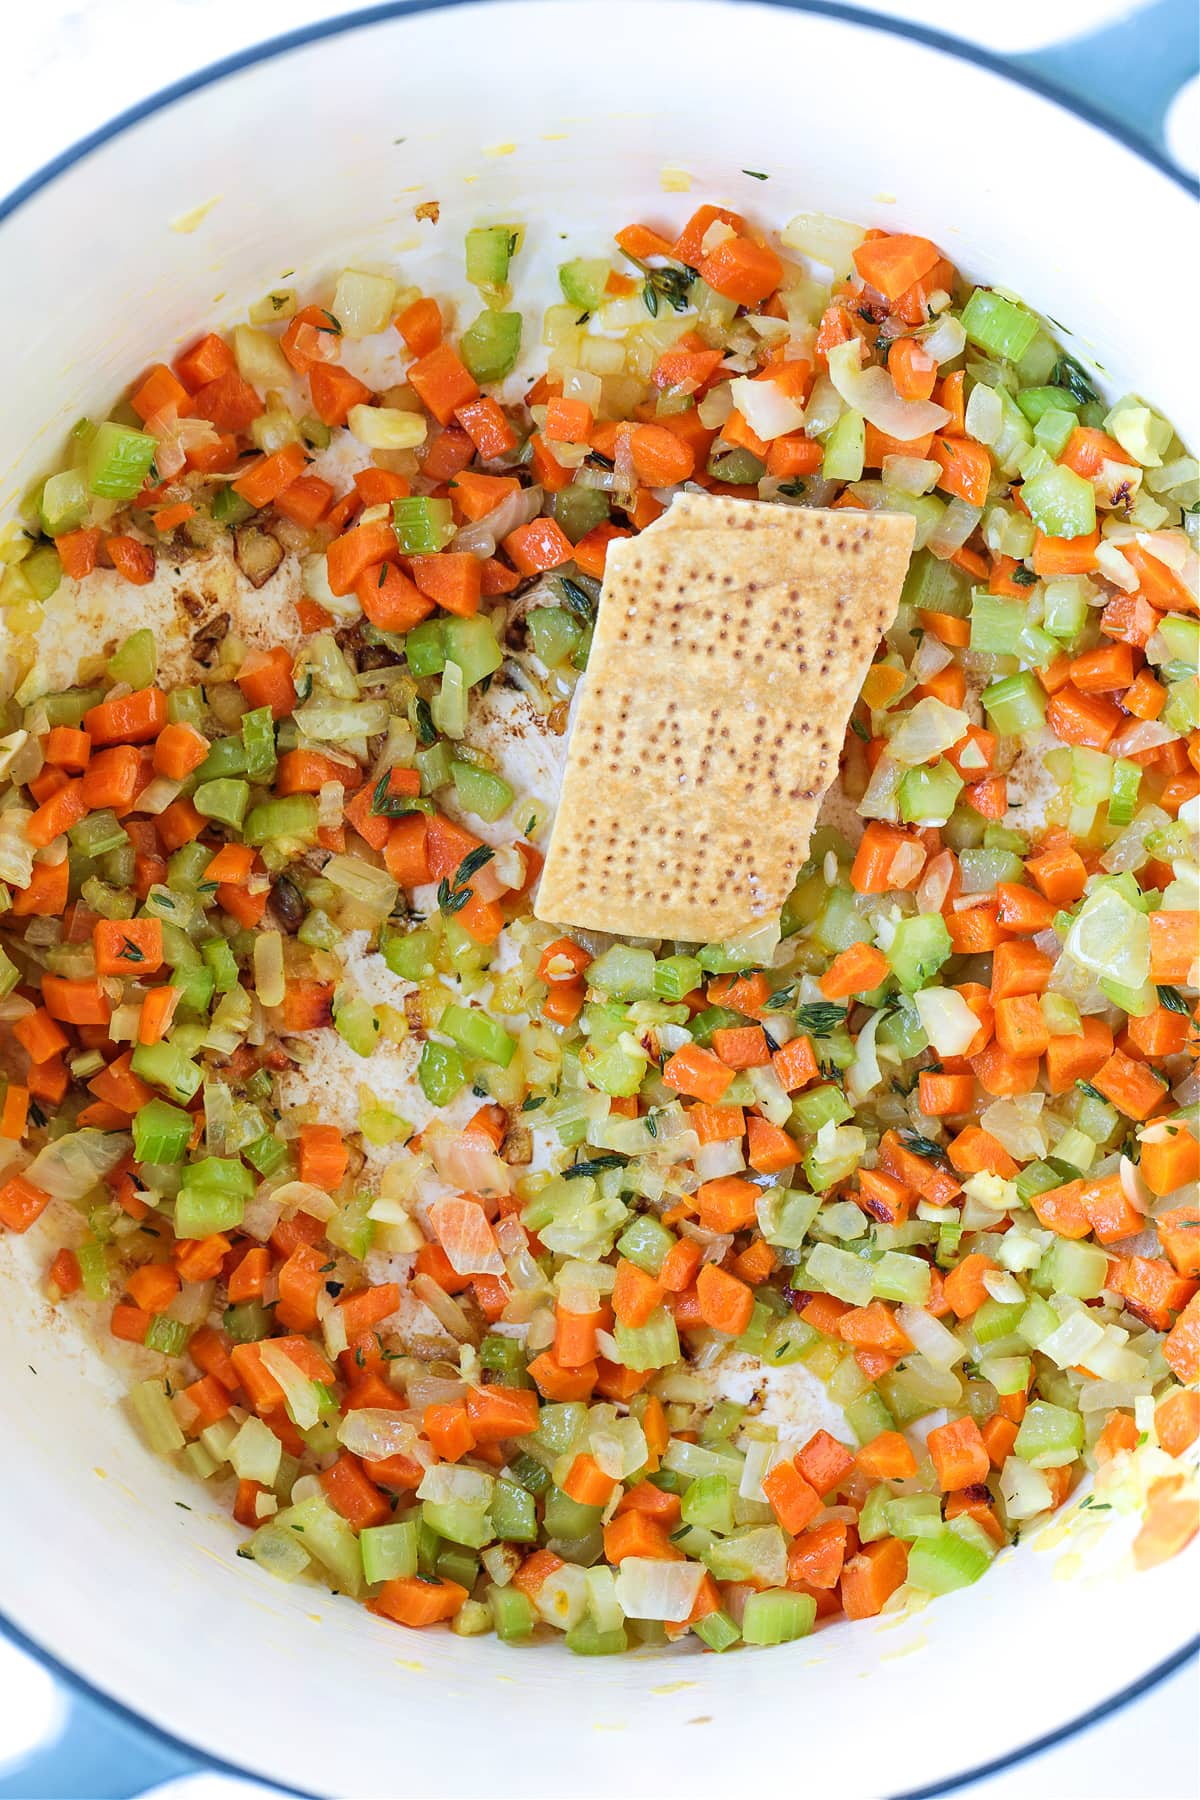 diced carrots, celery and onions in a pot with a parmesan cheese rind